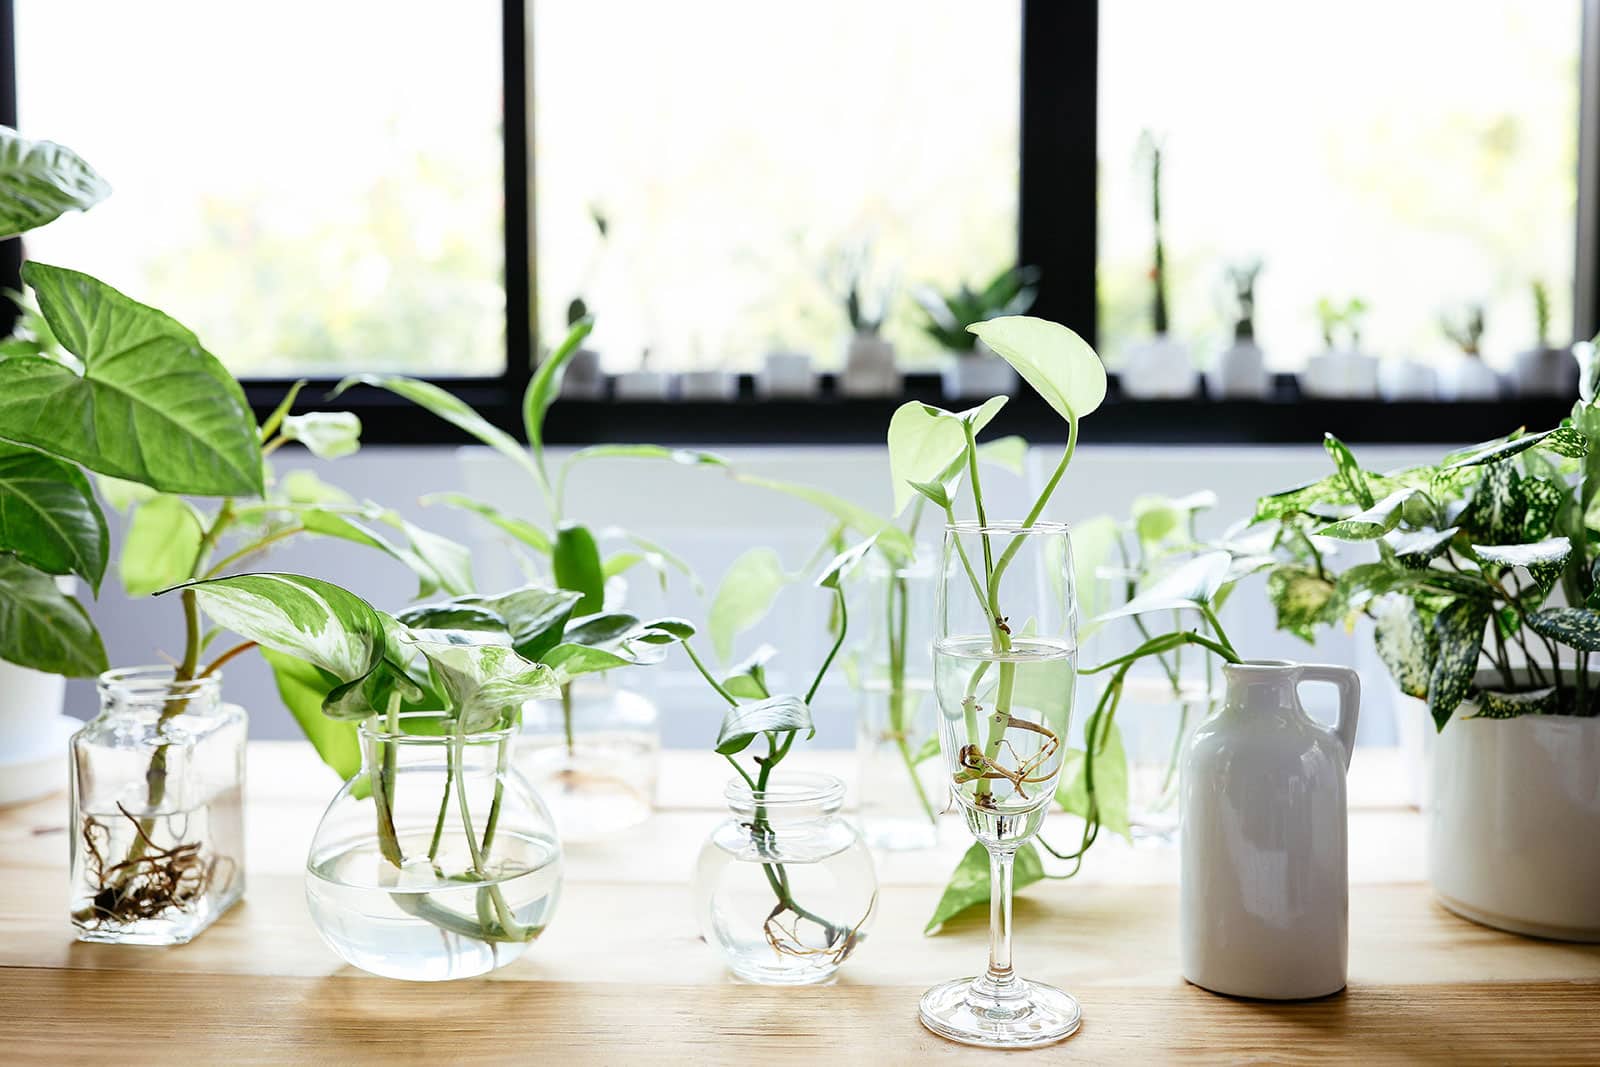 Group of plant cuttings rooting and growing in various glass containers in water